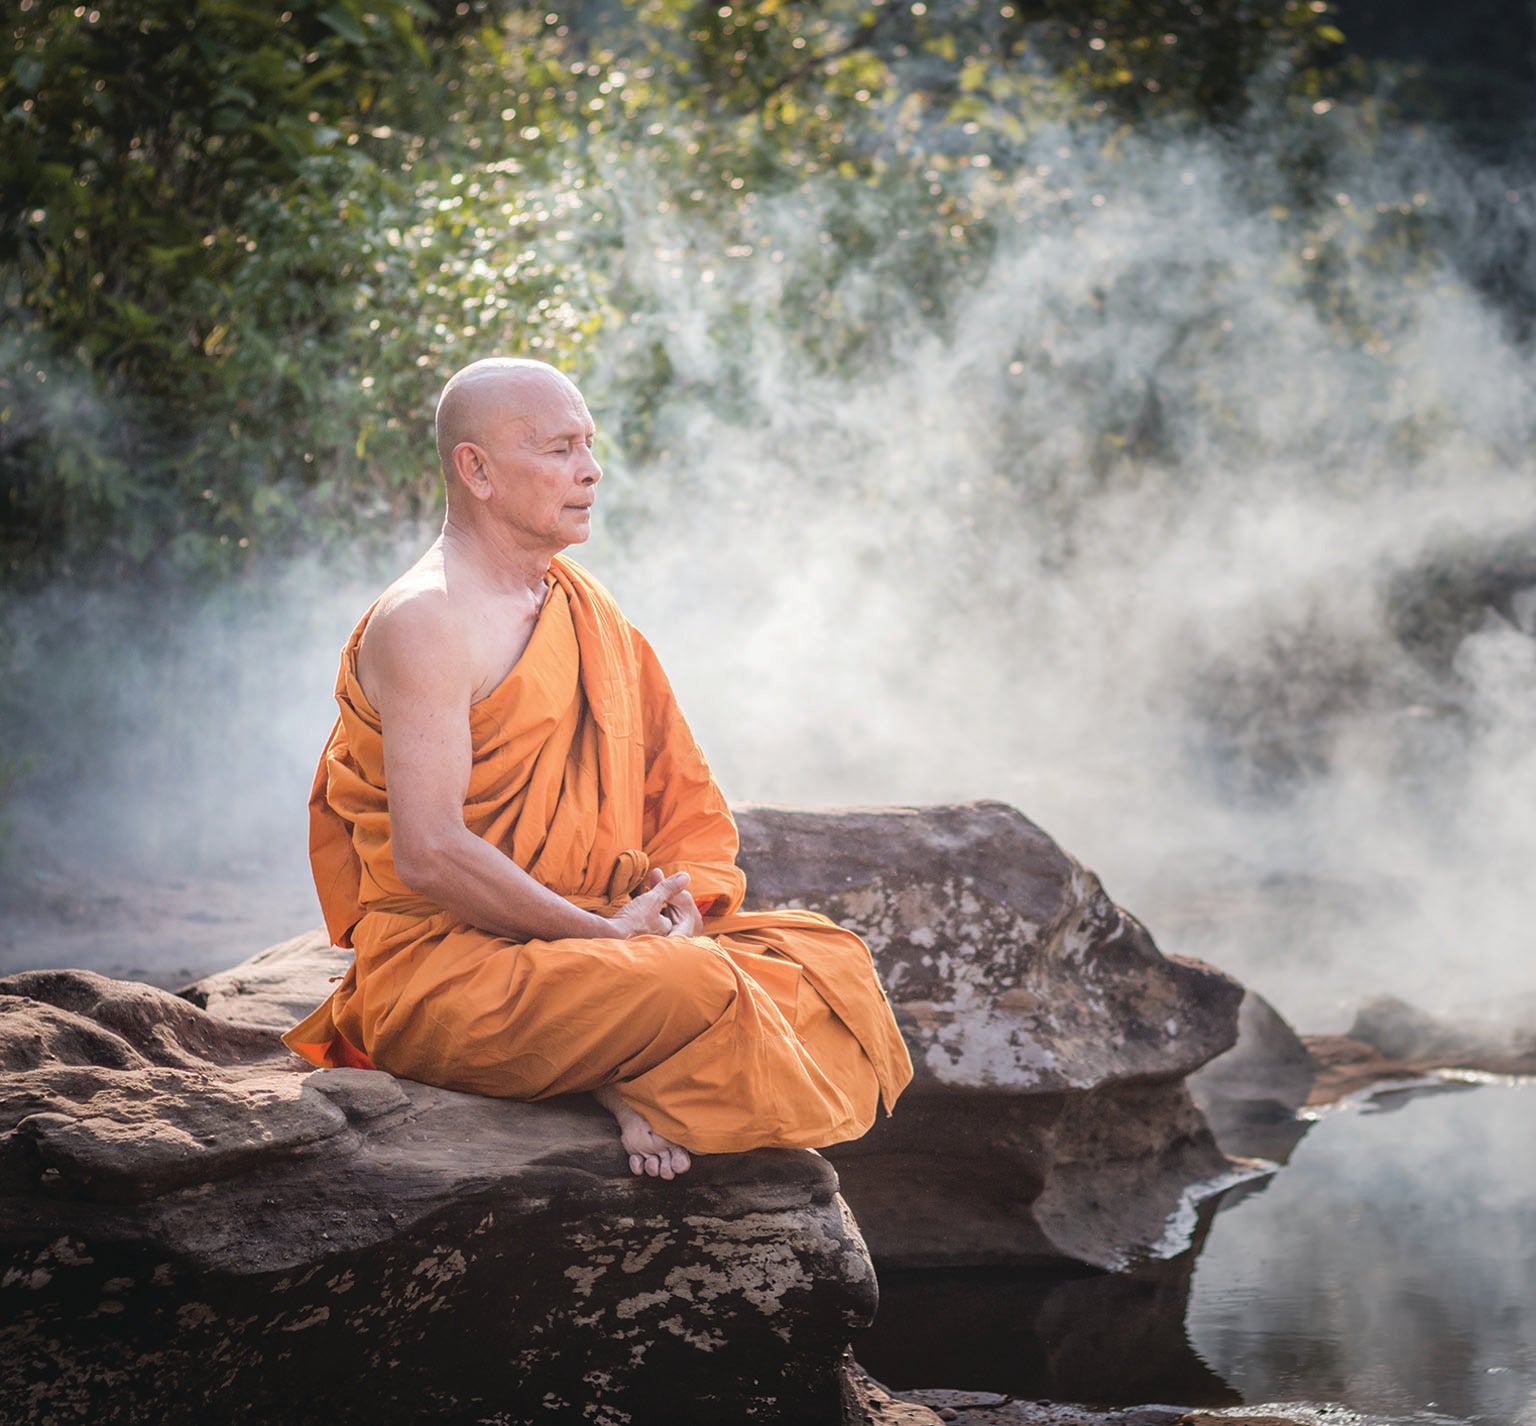 Monk meditating while sitting on a rock.